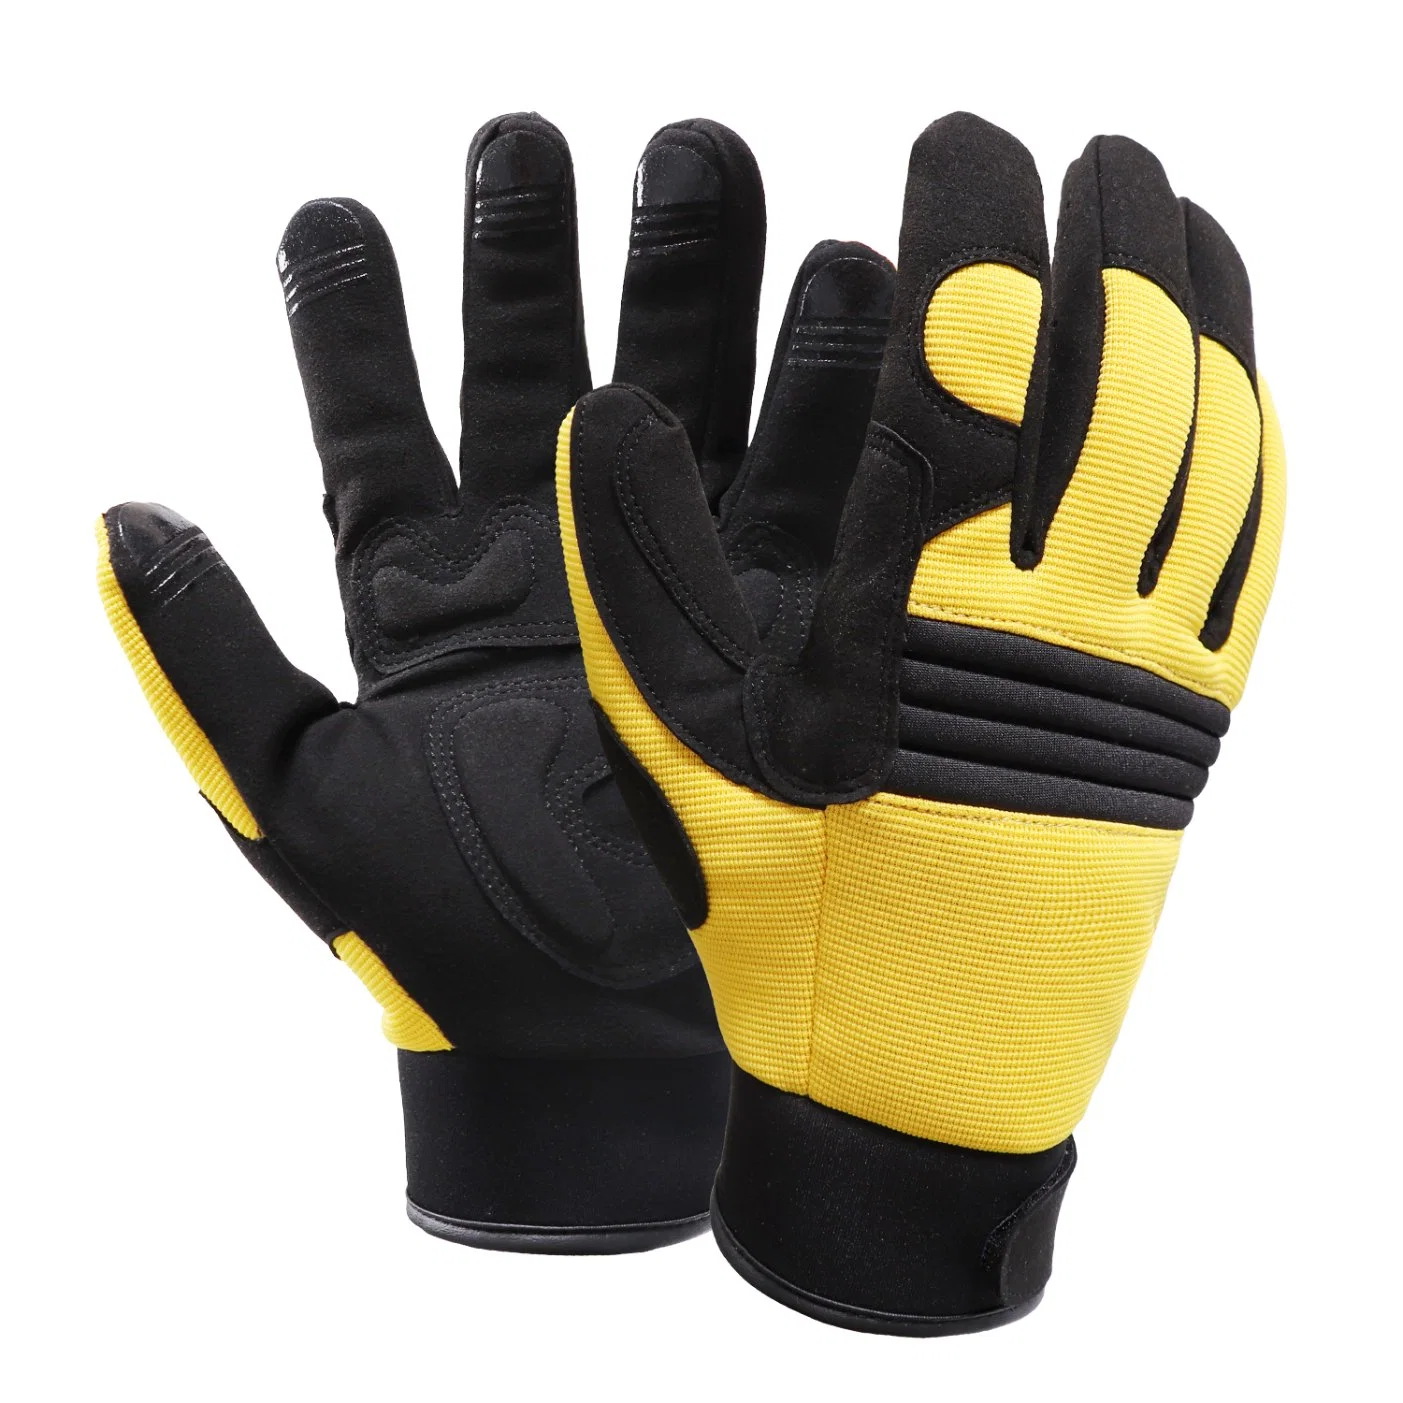 Outdoor Riding Motorcycle Gloves Anti-Vibration Cutting Protection Safety Working Hard-Wearing